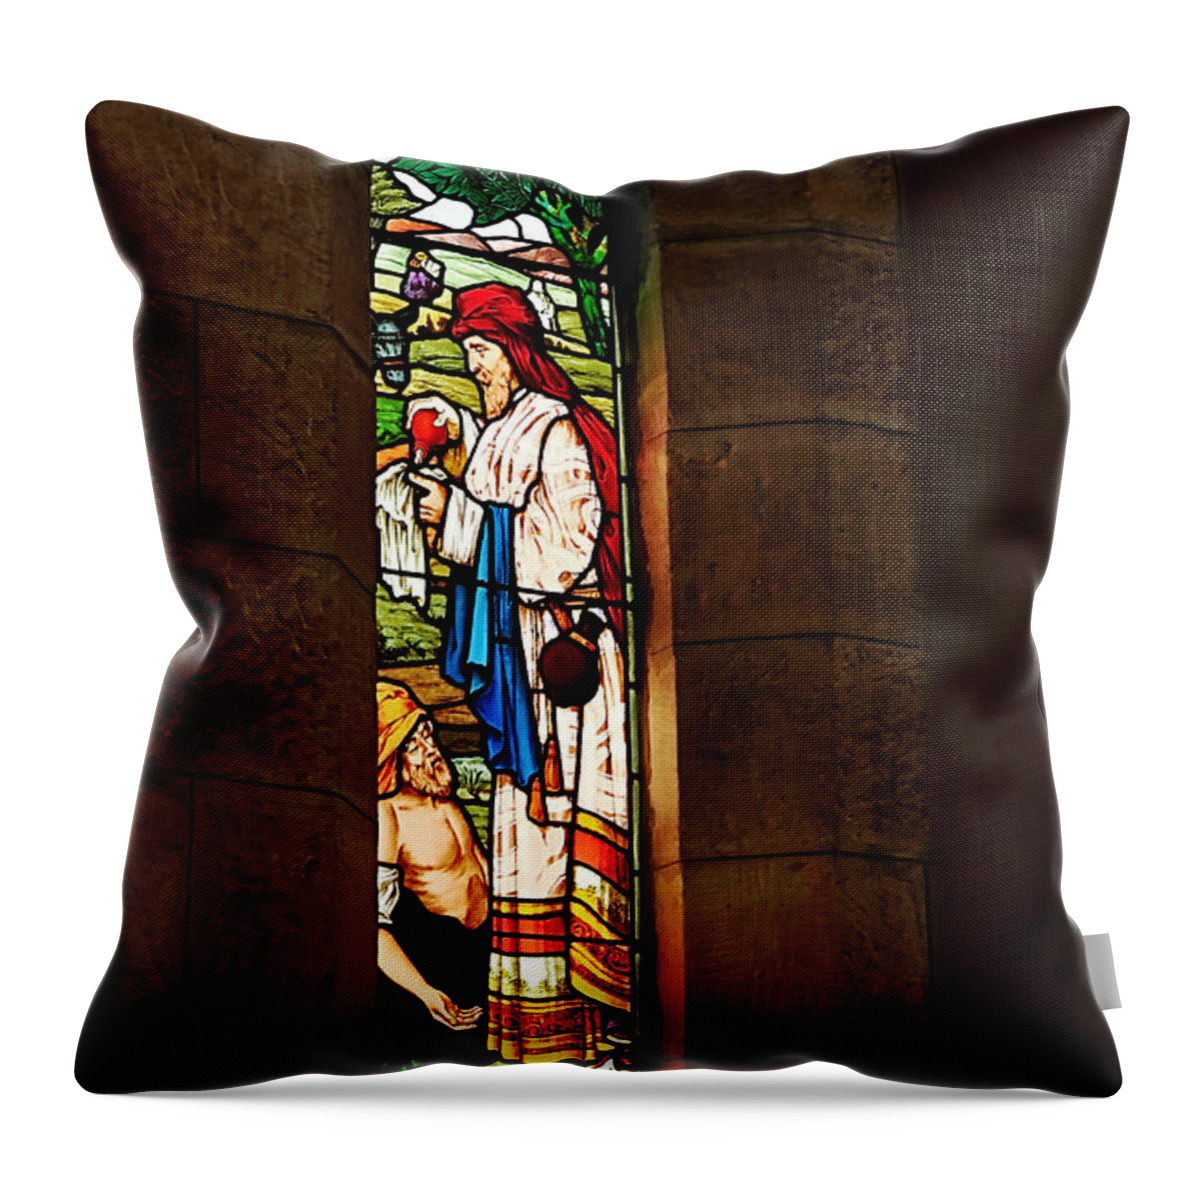 Photography Throw Pillow featuring the photograph 1865 - St. Jude's Church - Stained Glass Window by Kaye Menner